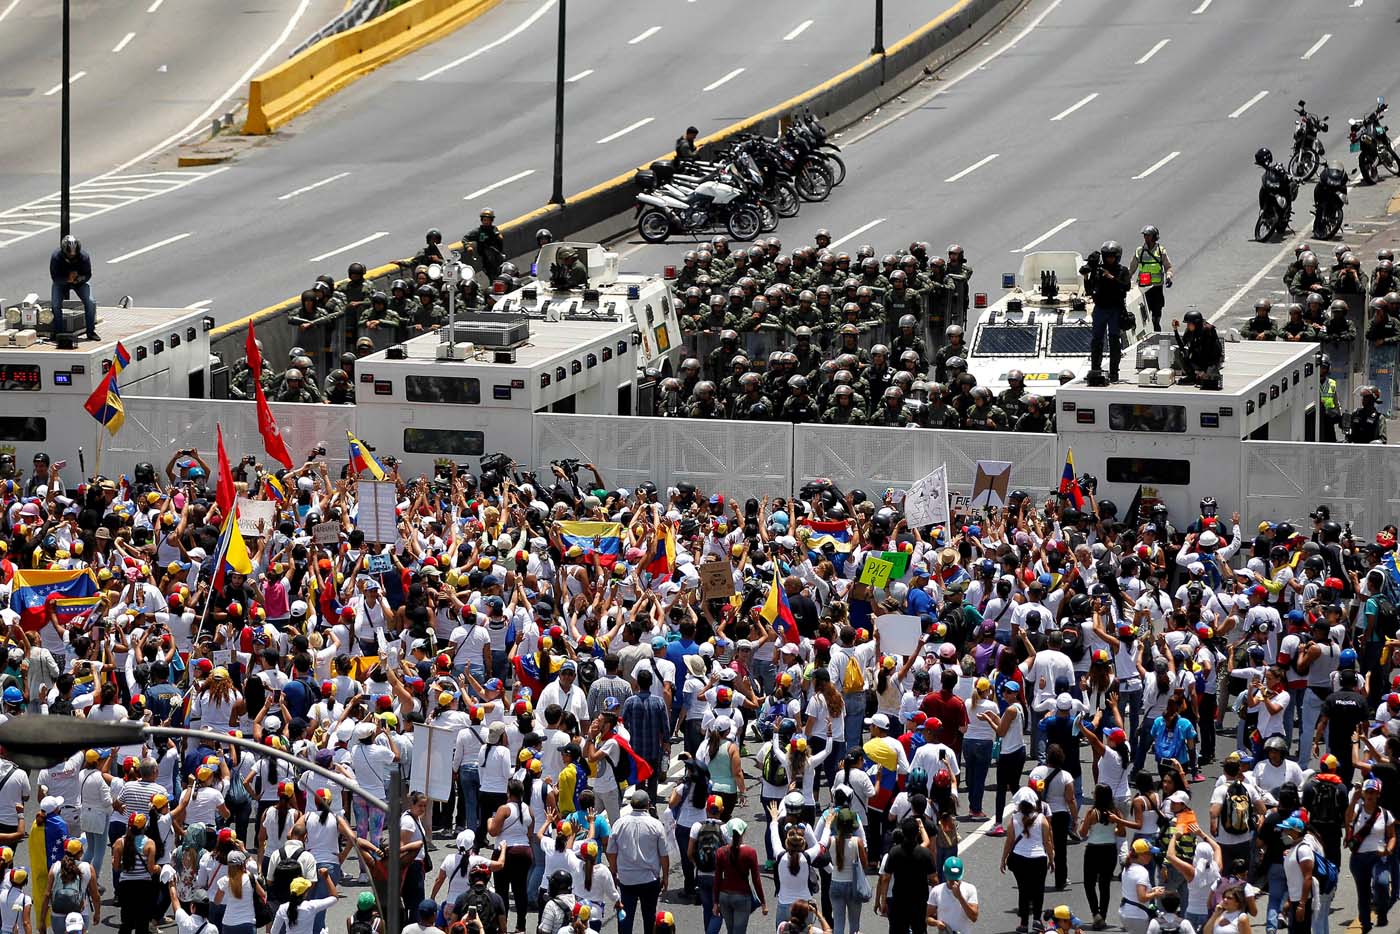 Demonstrators gather in front of the police as they attend a women's march to protest against President Nicolas Maduro's government in Caracas, Venezuela May 6, 2017. REUTERS/Christian Veron